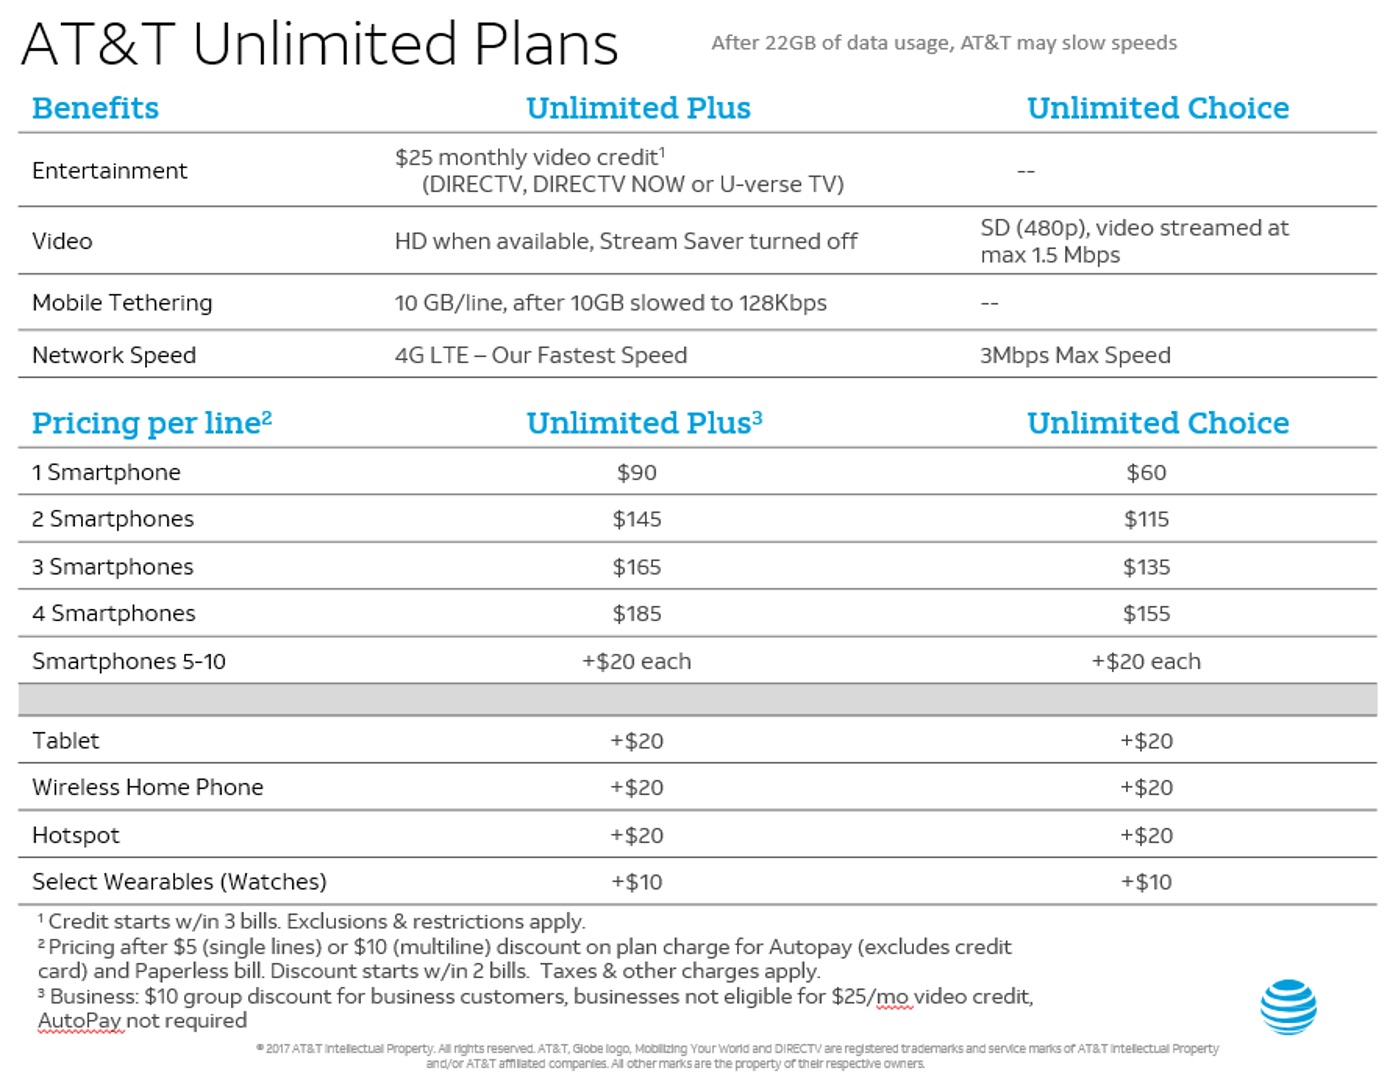 at&t lowers unlimited data price to $90, adds 10gb of tethering